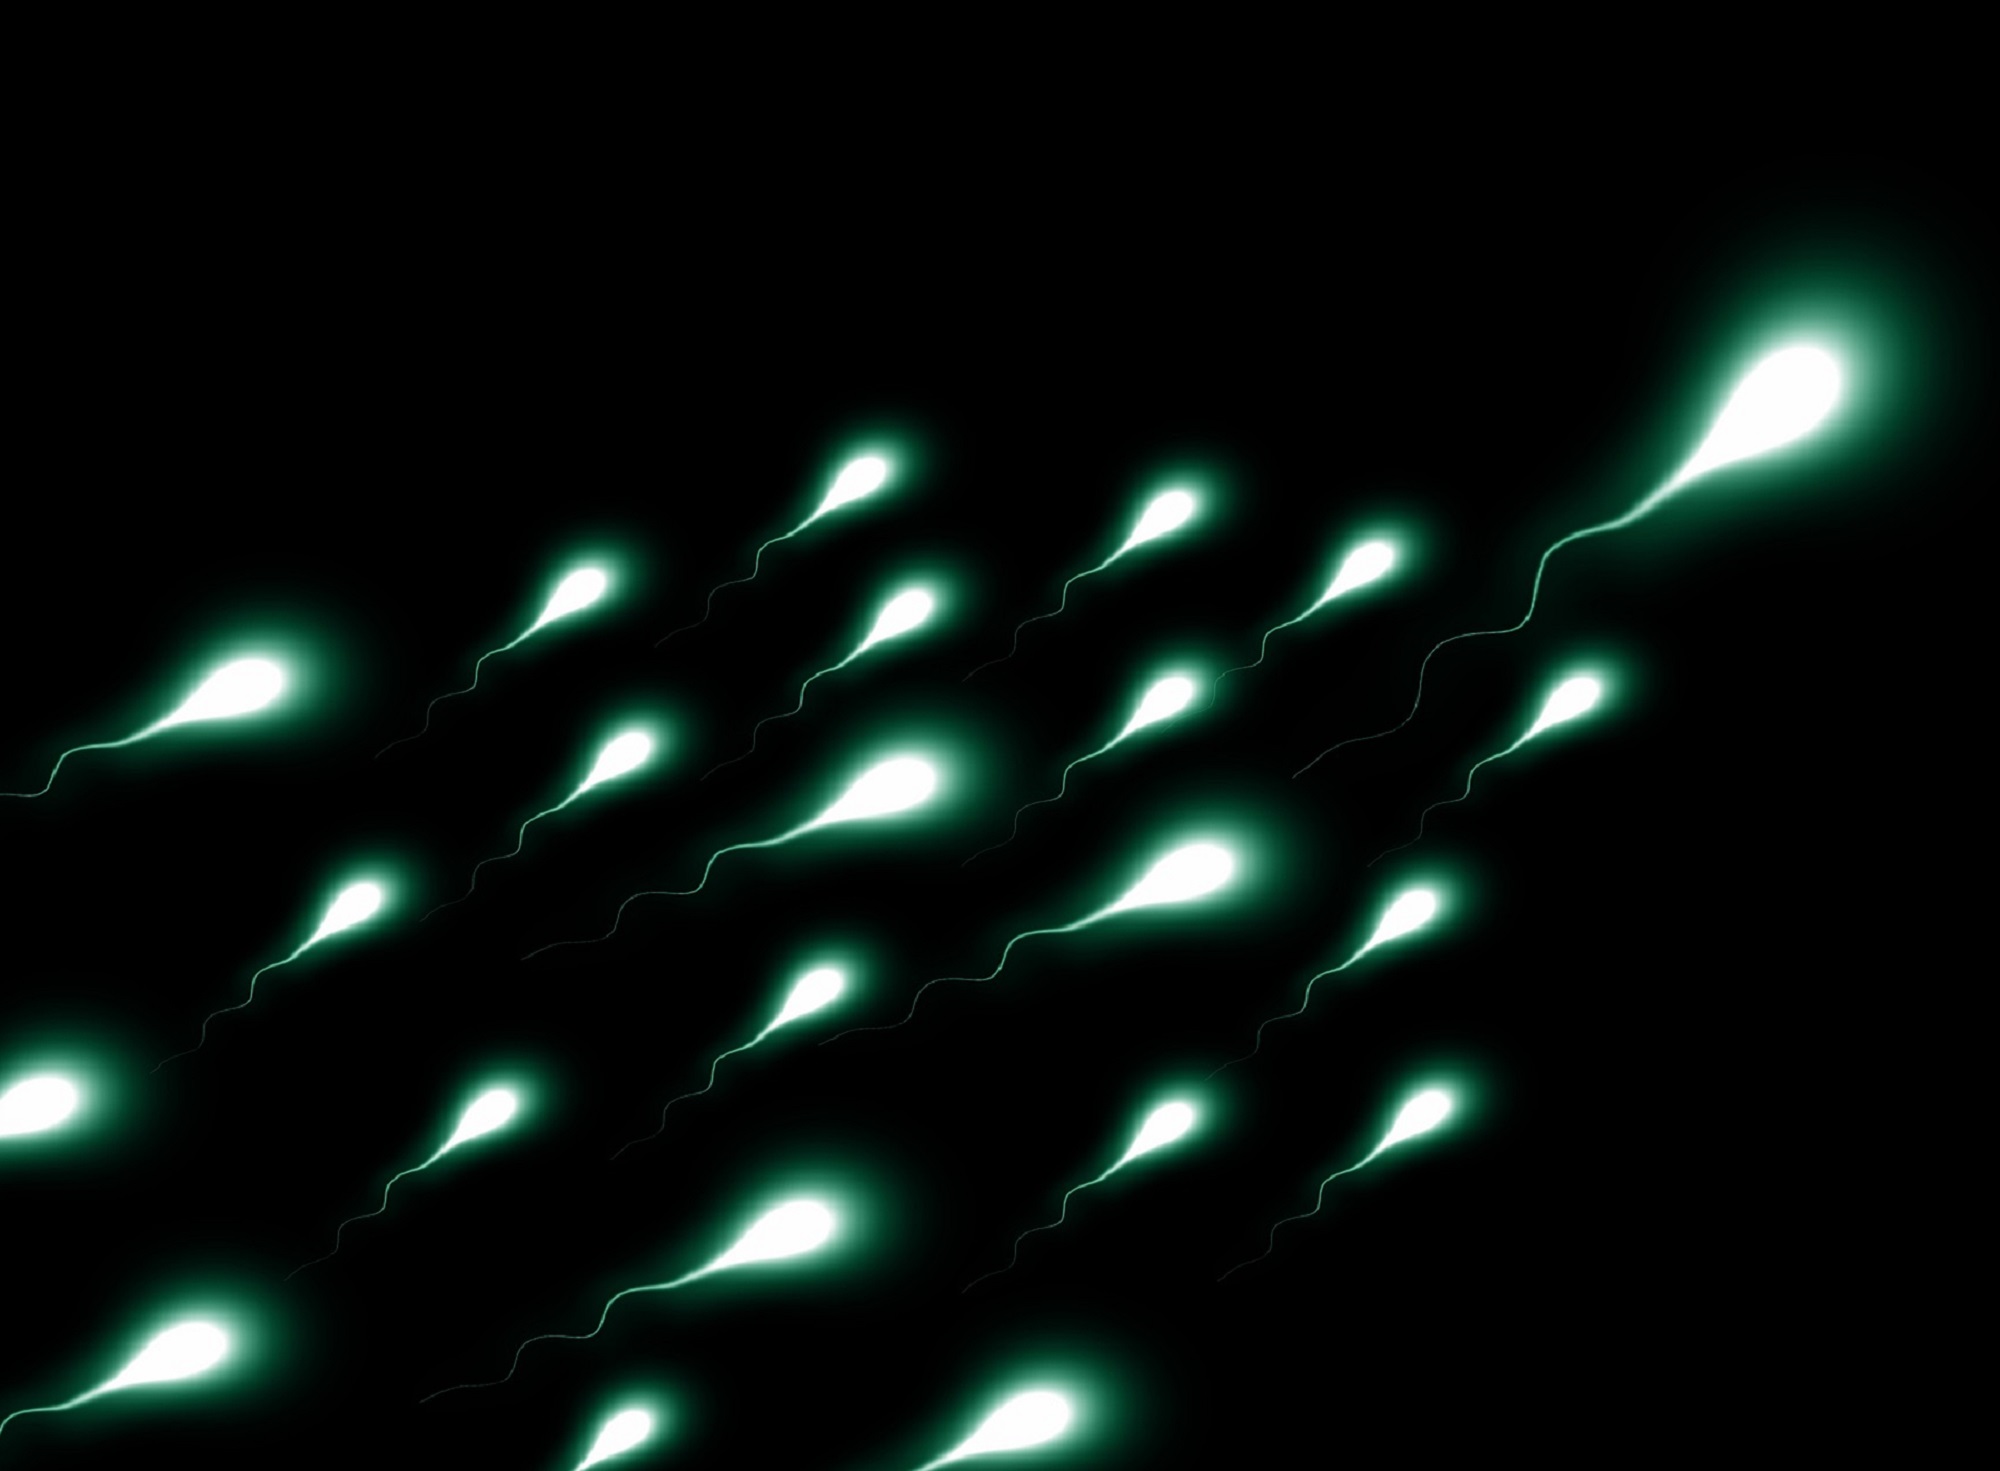 Pollution could be harming sperm around the world